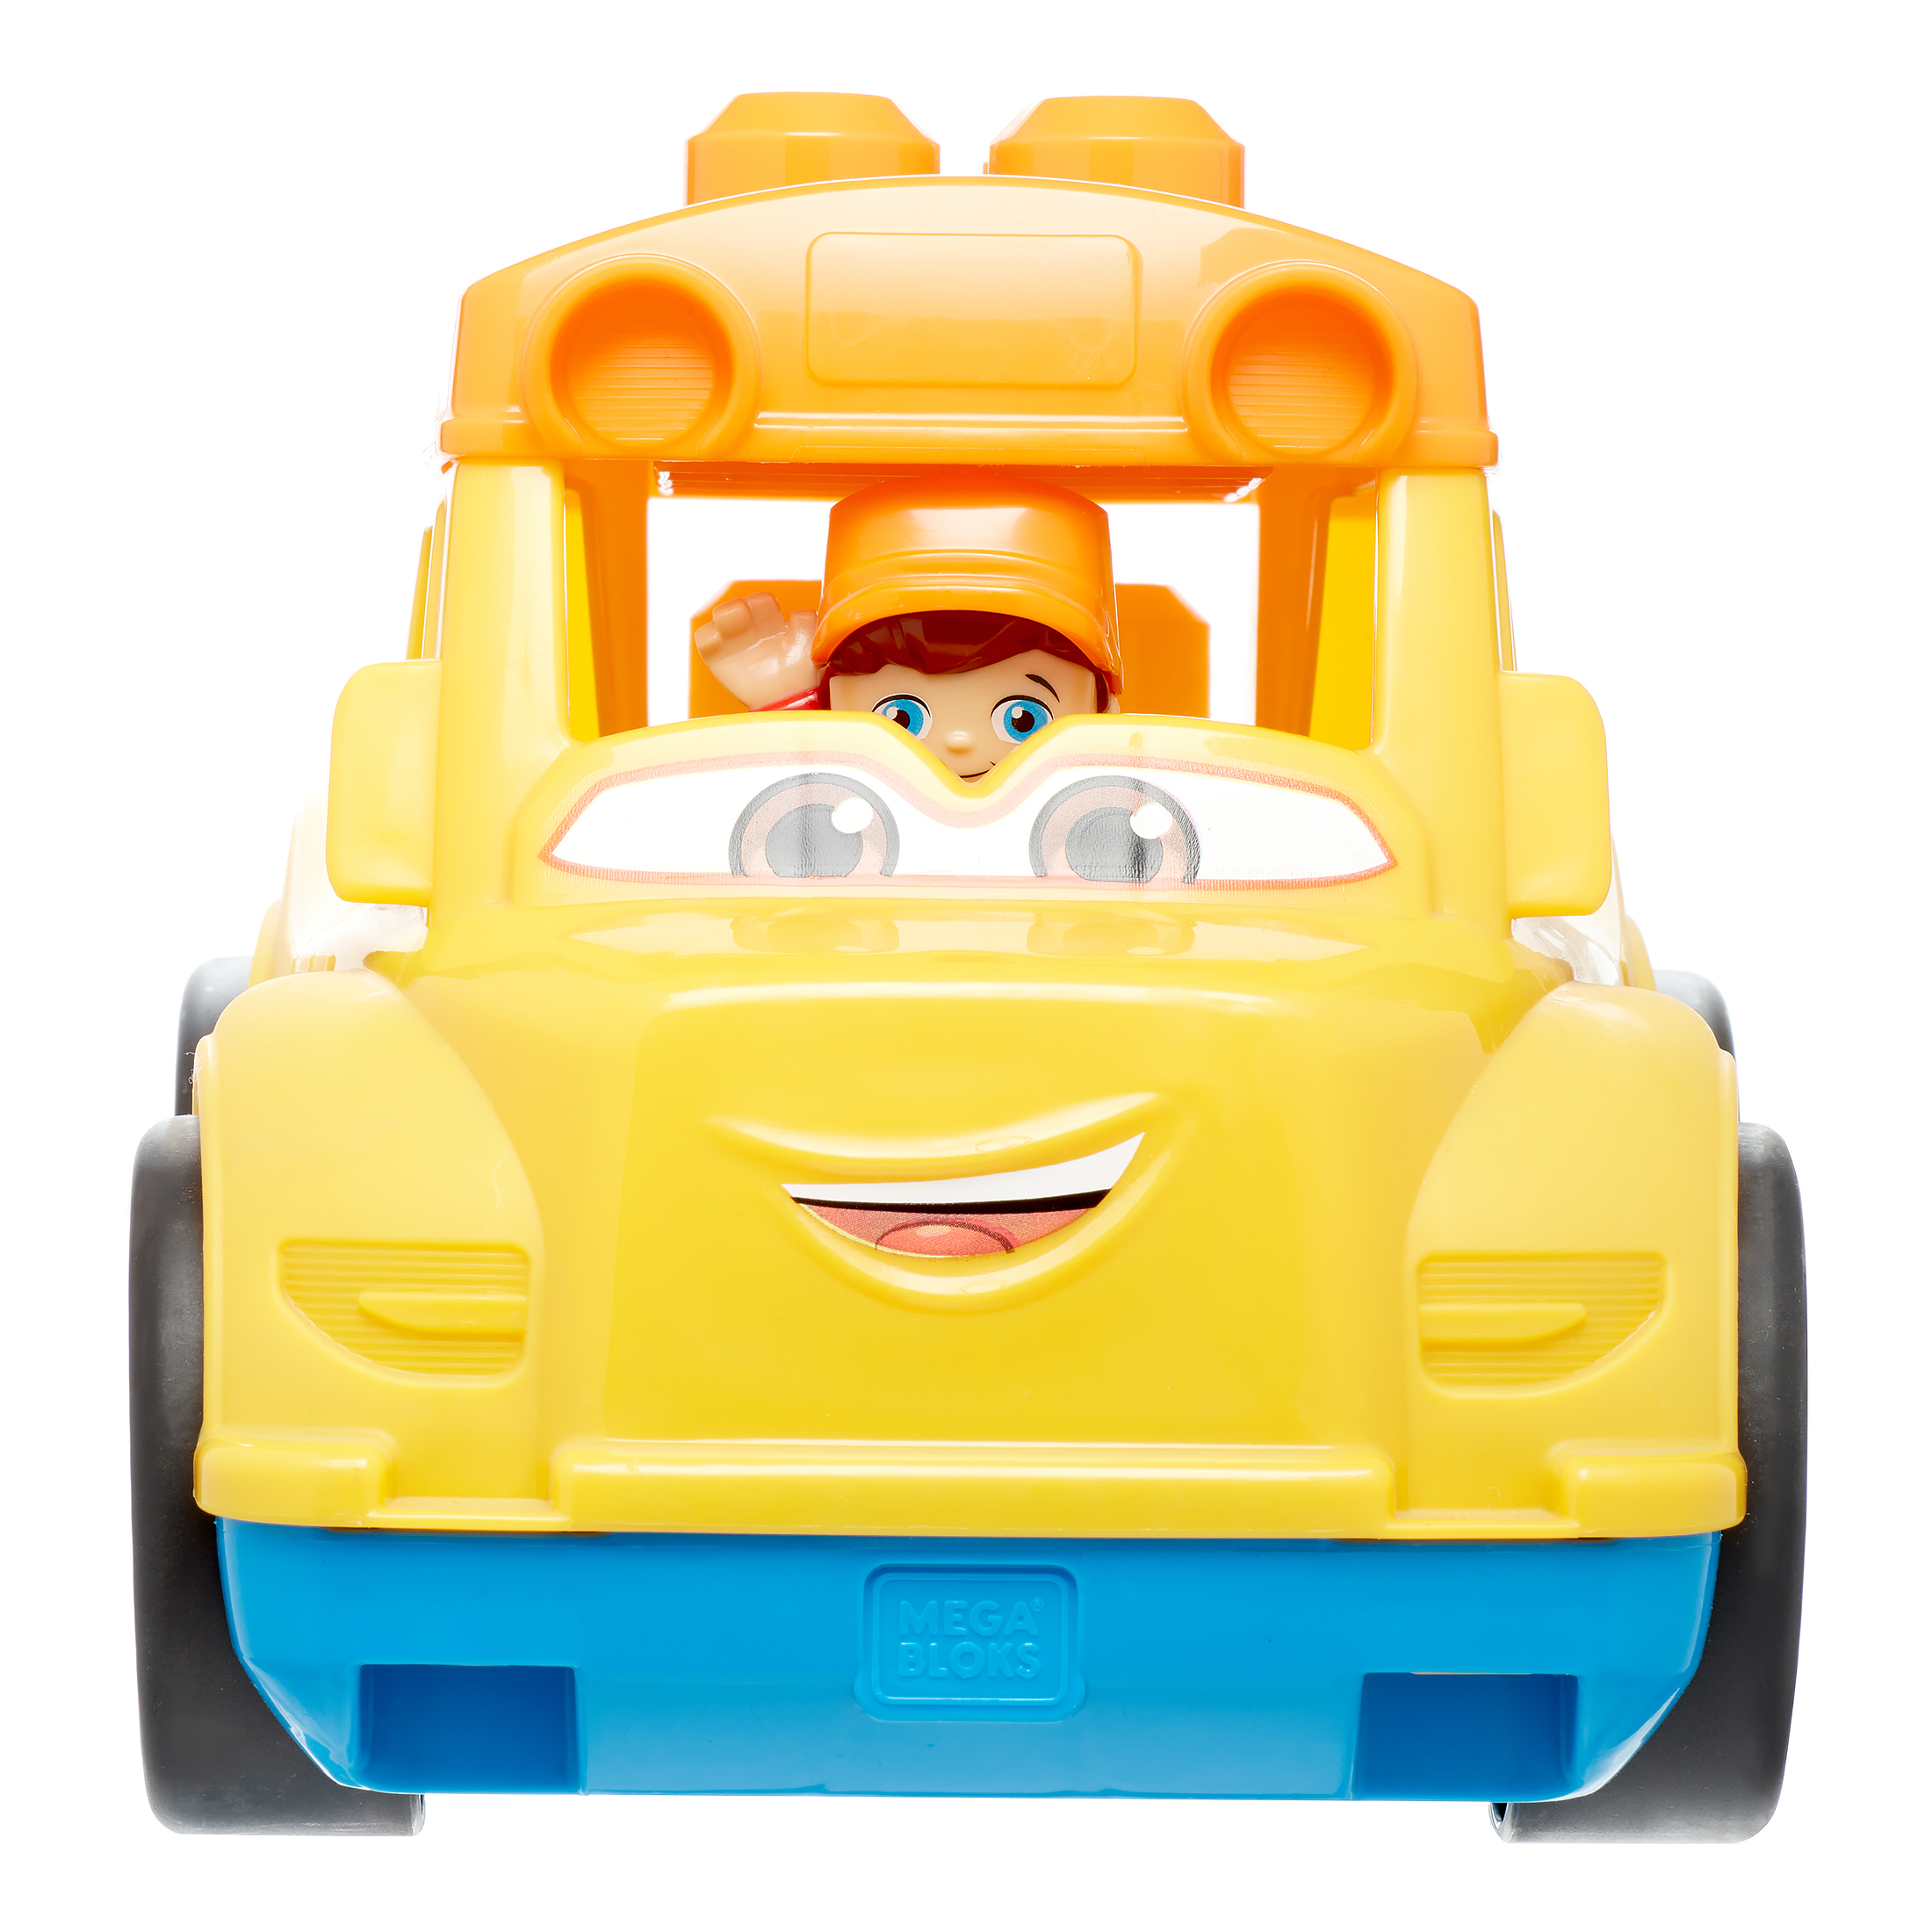 Mega Bloks First Builders Sonny School Bus with Big Building Blocks, Building Toys for Toddlers (6 Pieces) - image 5 of 8